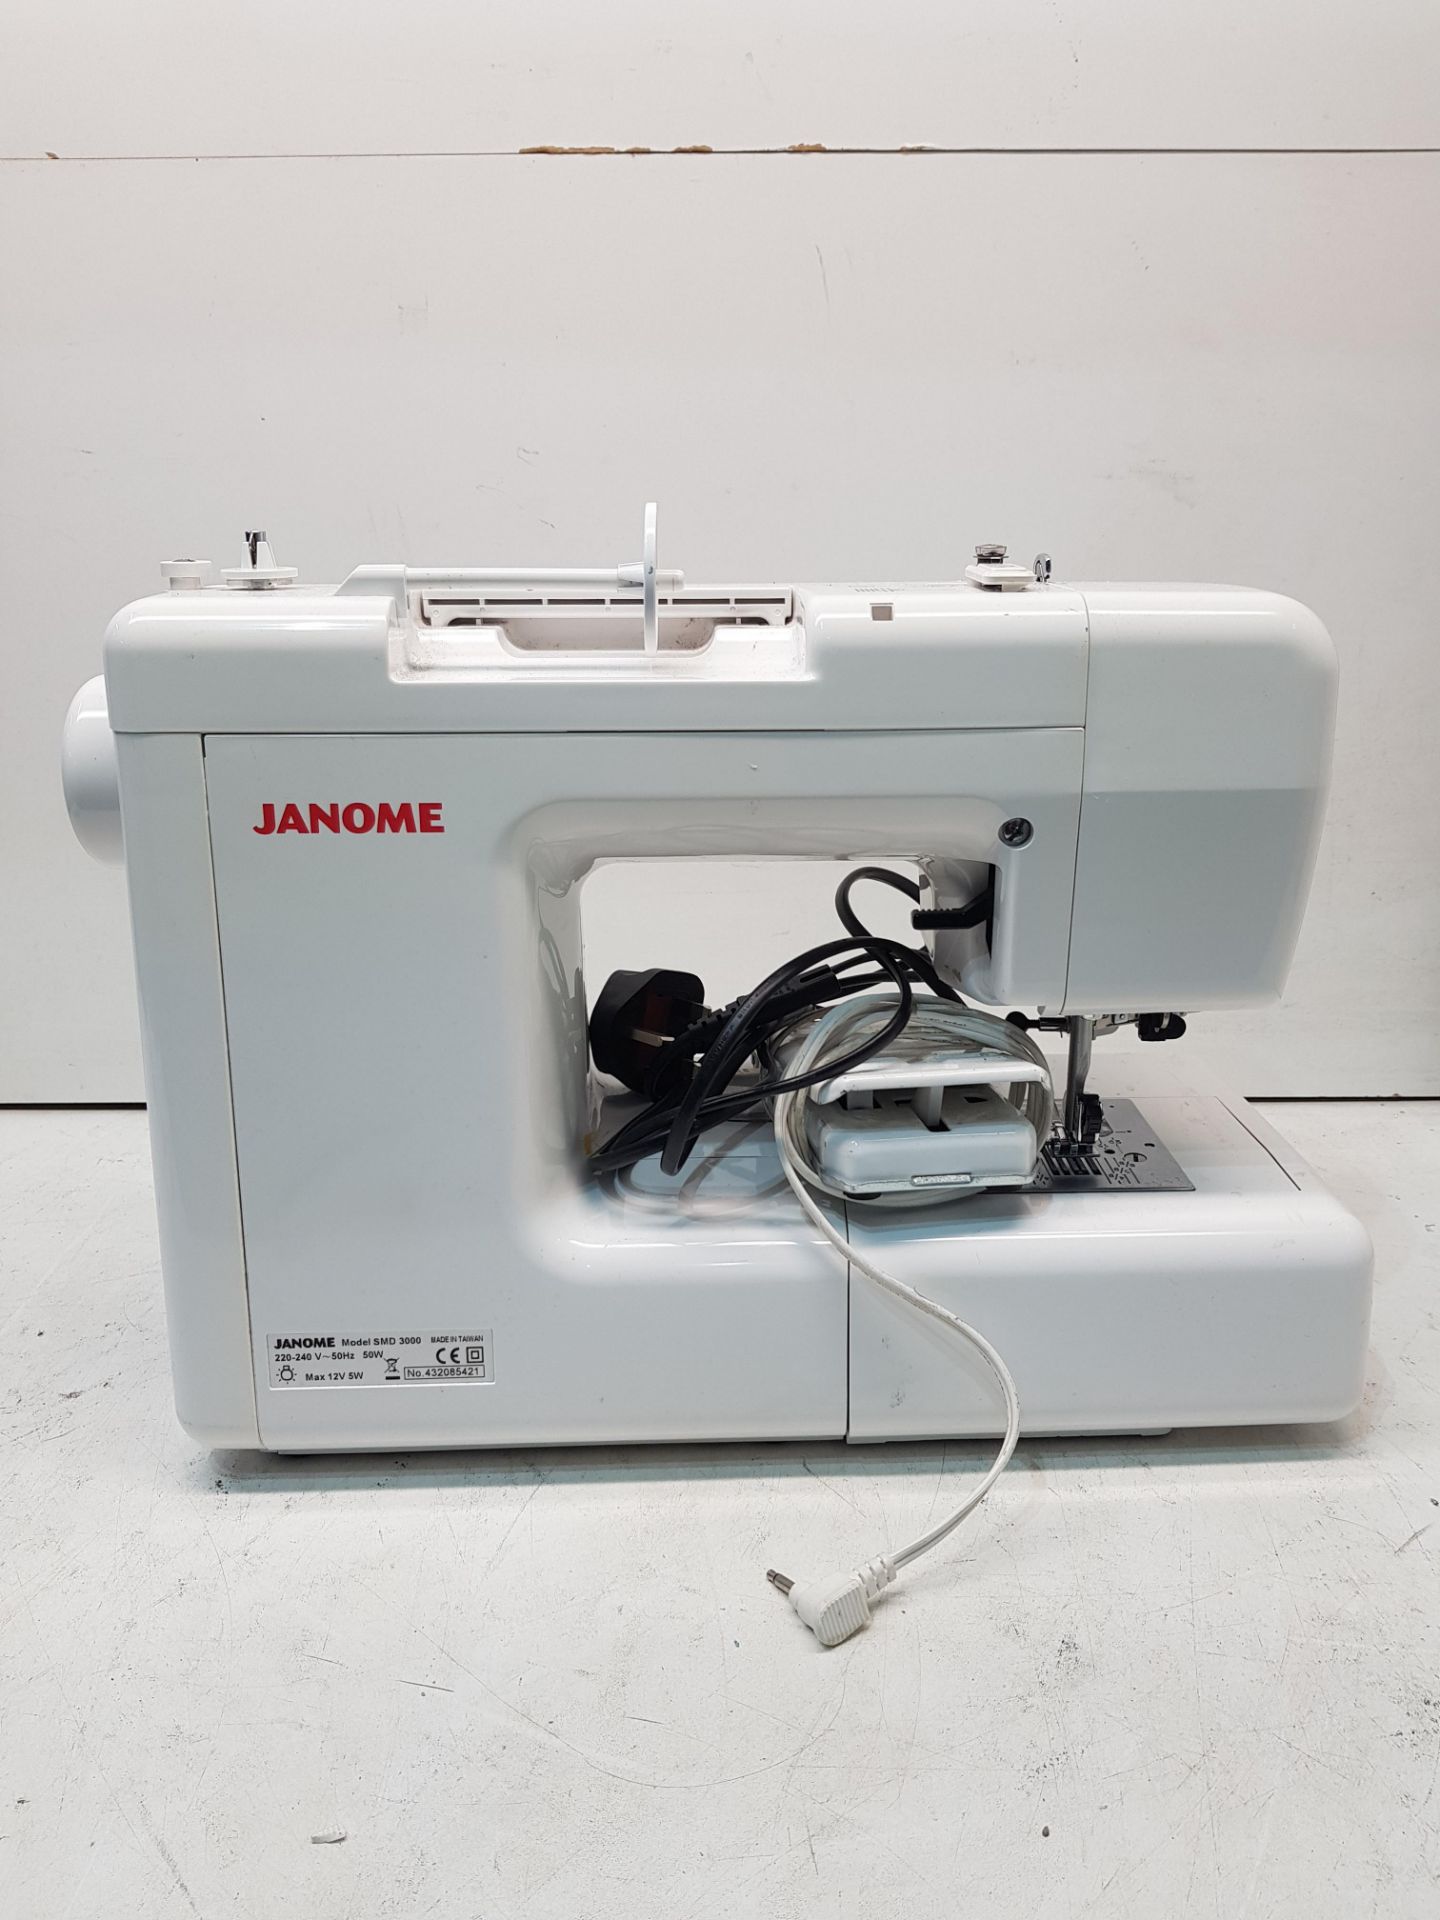 Janome SMD 3000 Sewing Machine S/N: 432085421 - Image 4 of 4